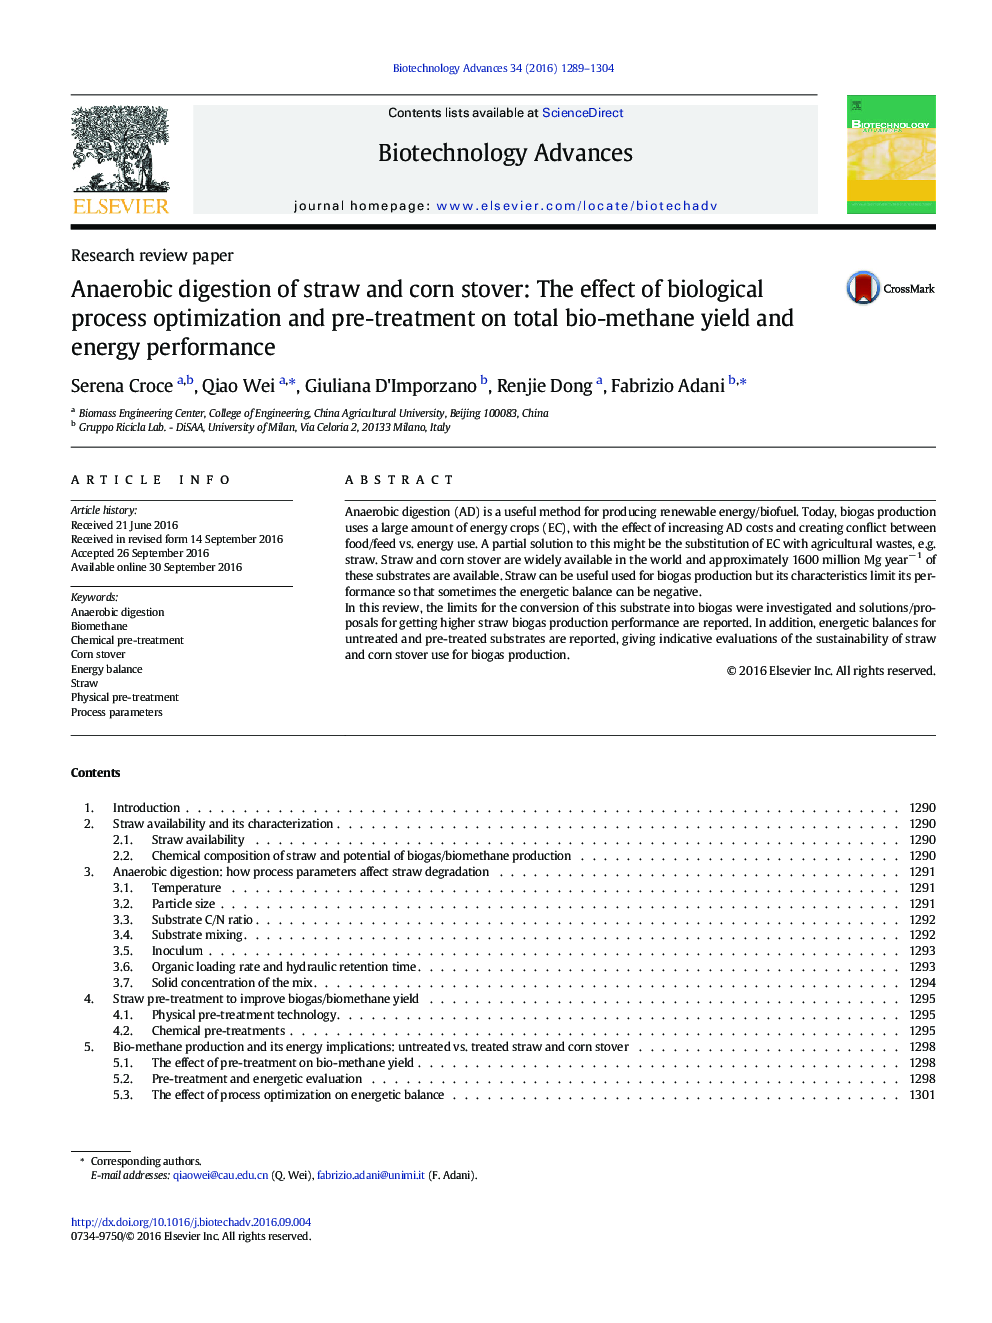 Research review paperAnaerobic digestion of straw and corn stover: The effect of biological process optimization and pre-treatment on total bio-methane yield and energy performance